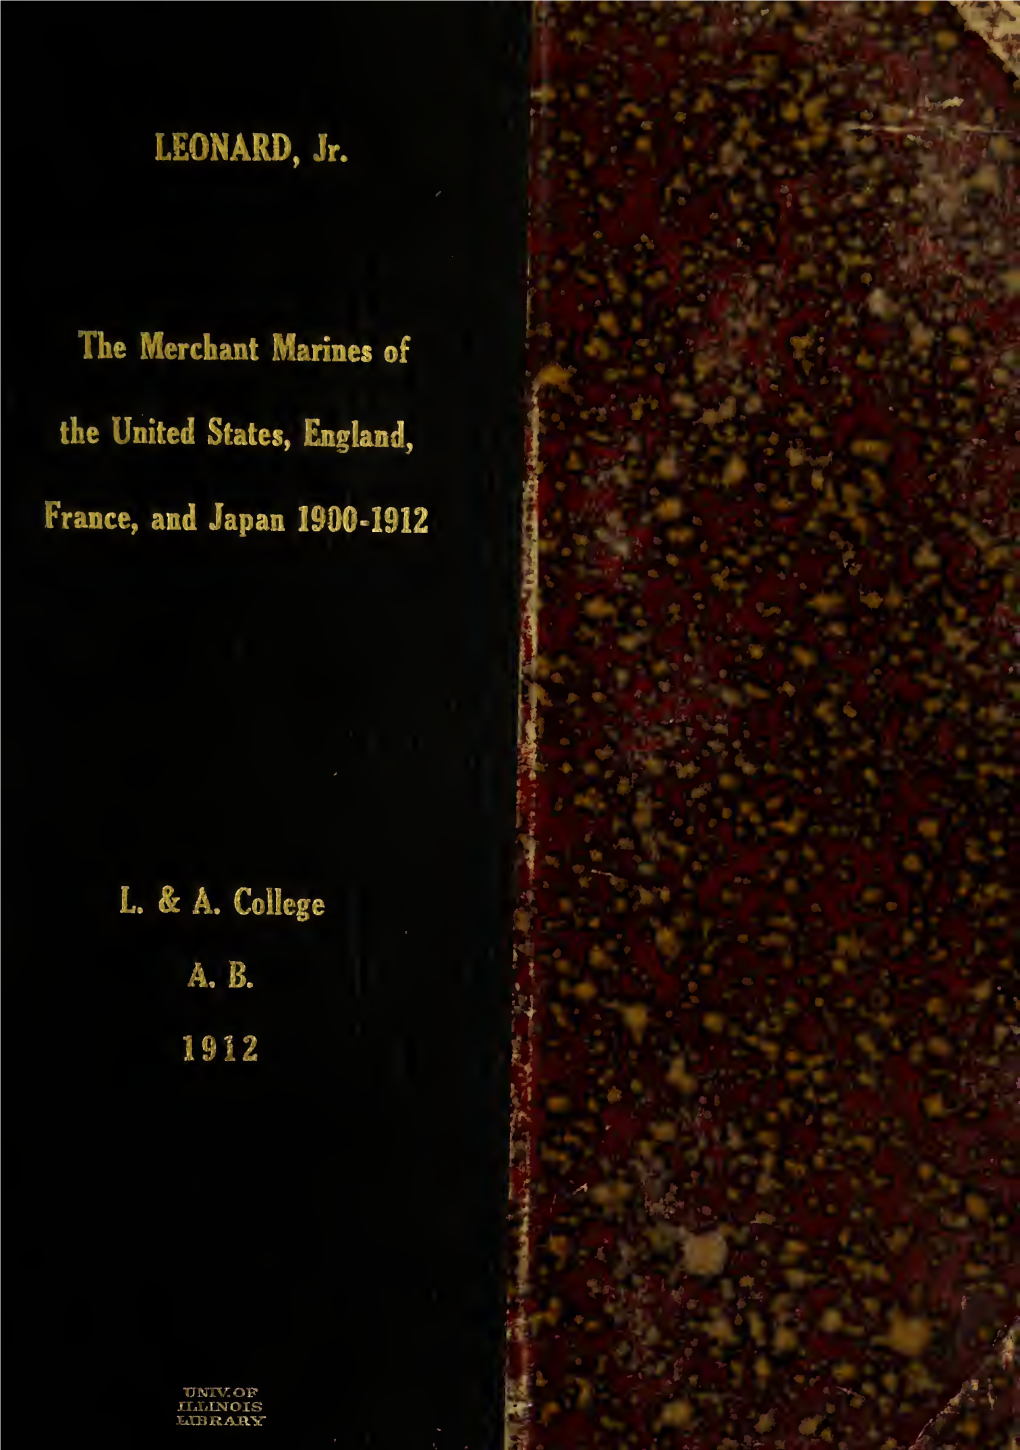 The Merchant Marines of the United States, England, France, and Japan 1900-1912